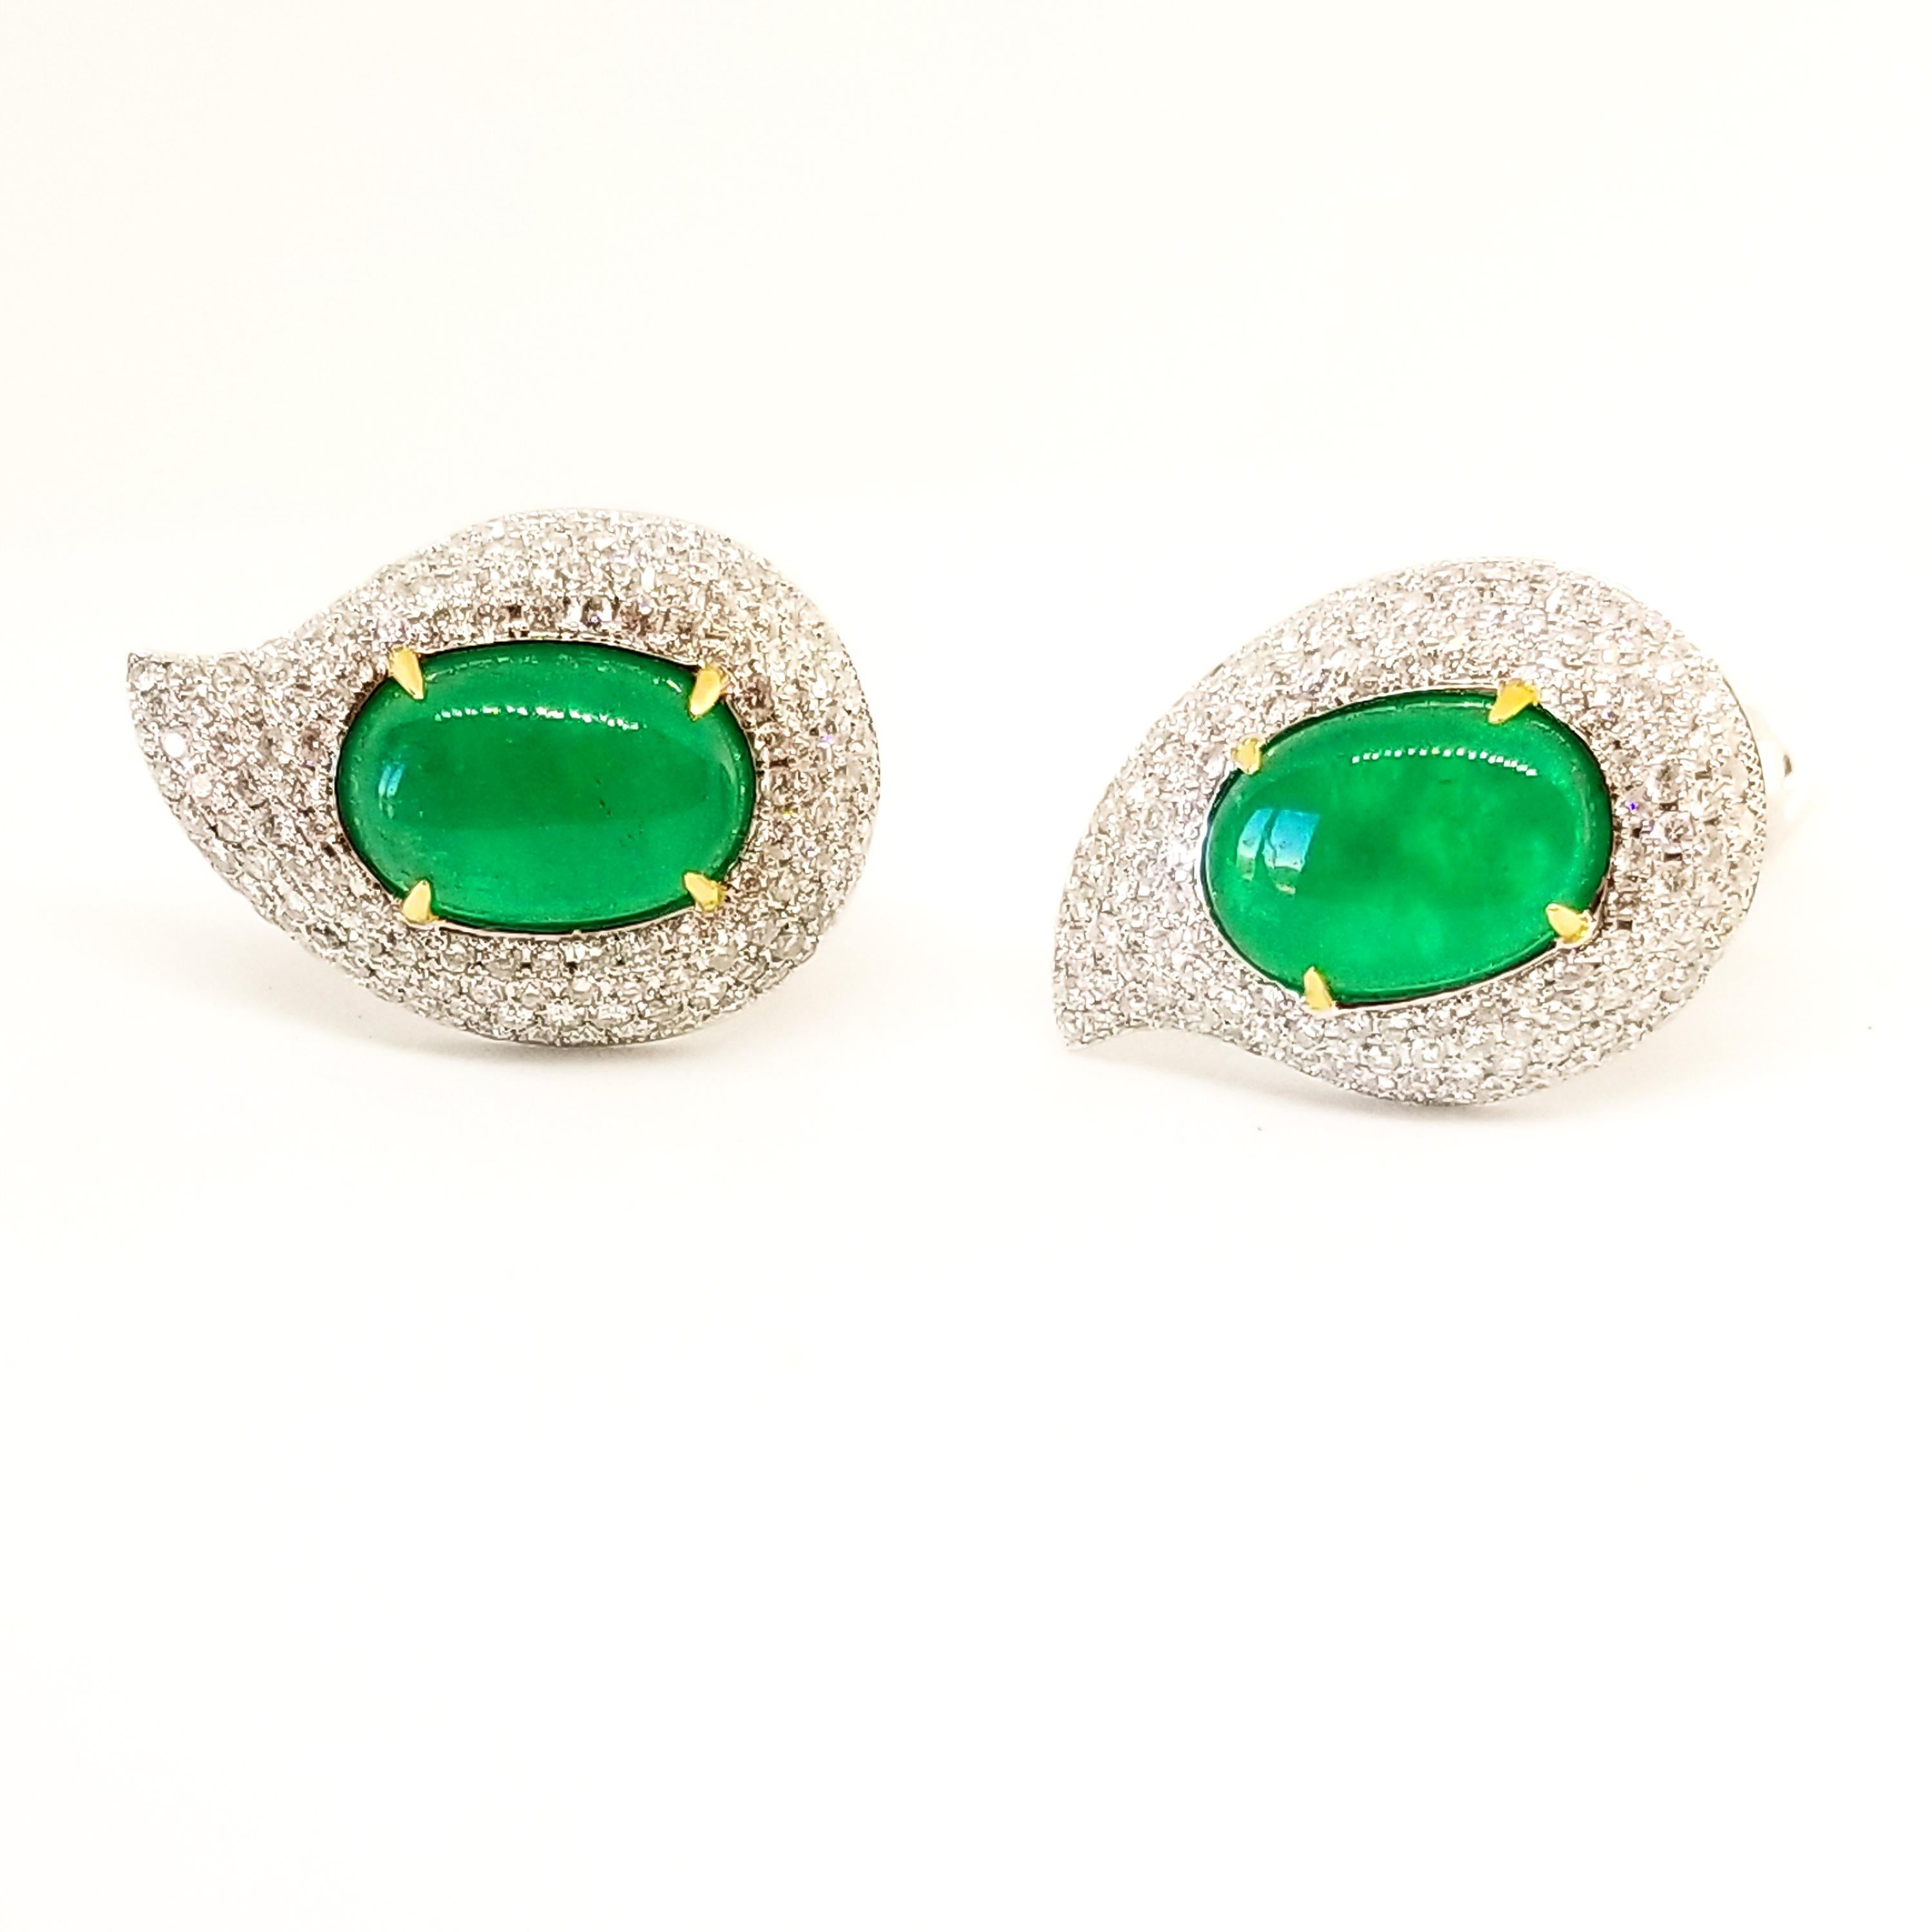 This Brilliant Green pair of on the earlobe, Elegantly Curved Droplet Earrings feature a pair of Oval Cabochon Emeralds of rich Grass Green Hue and a combined weight of 6.52 Carats. The Gem Quality, Genuine Emeralds measure 12 x 8mm each and are